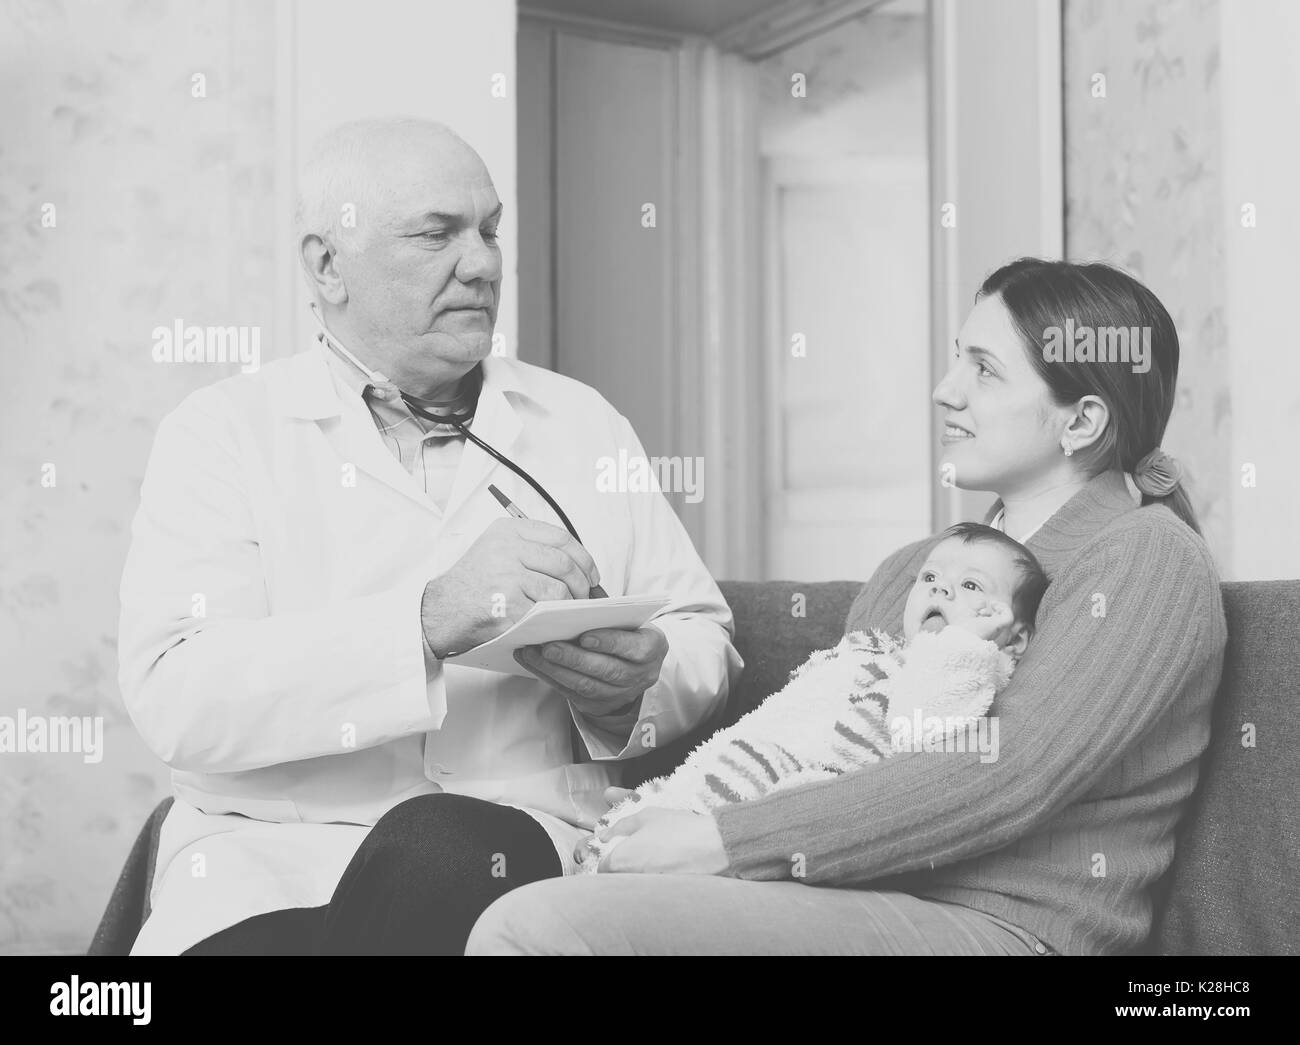 Pediatrician Black and White Stock Photos & Images - Alamy